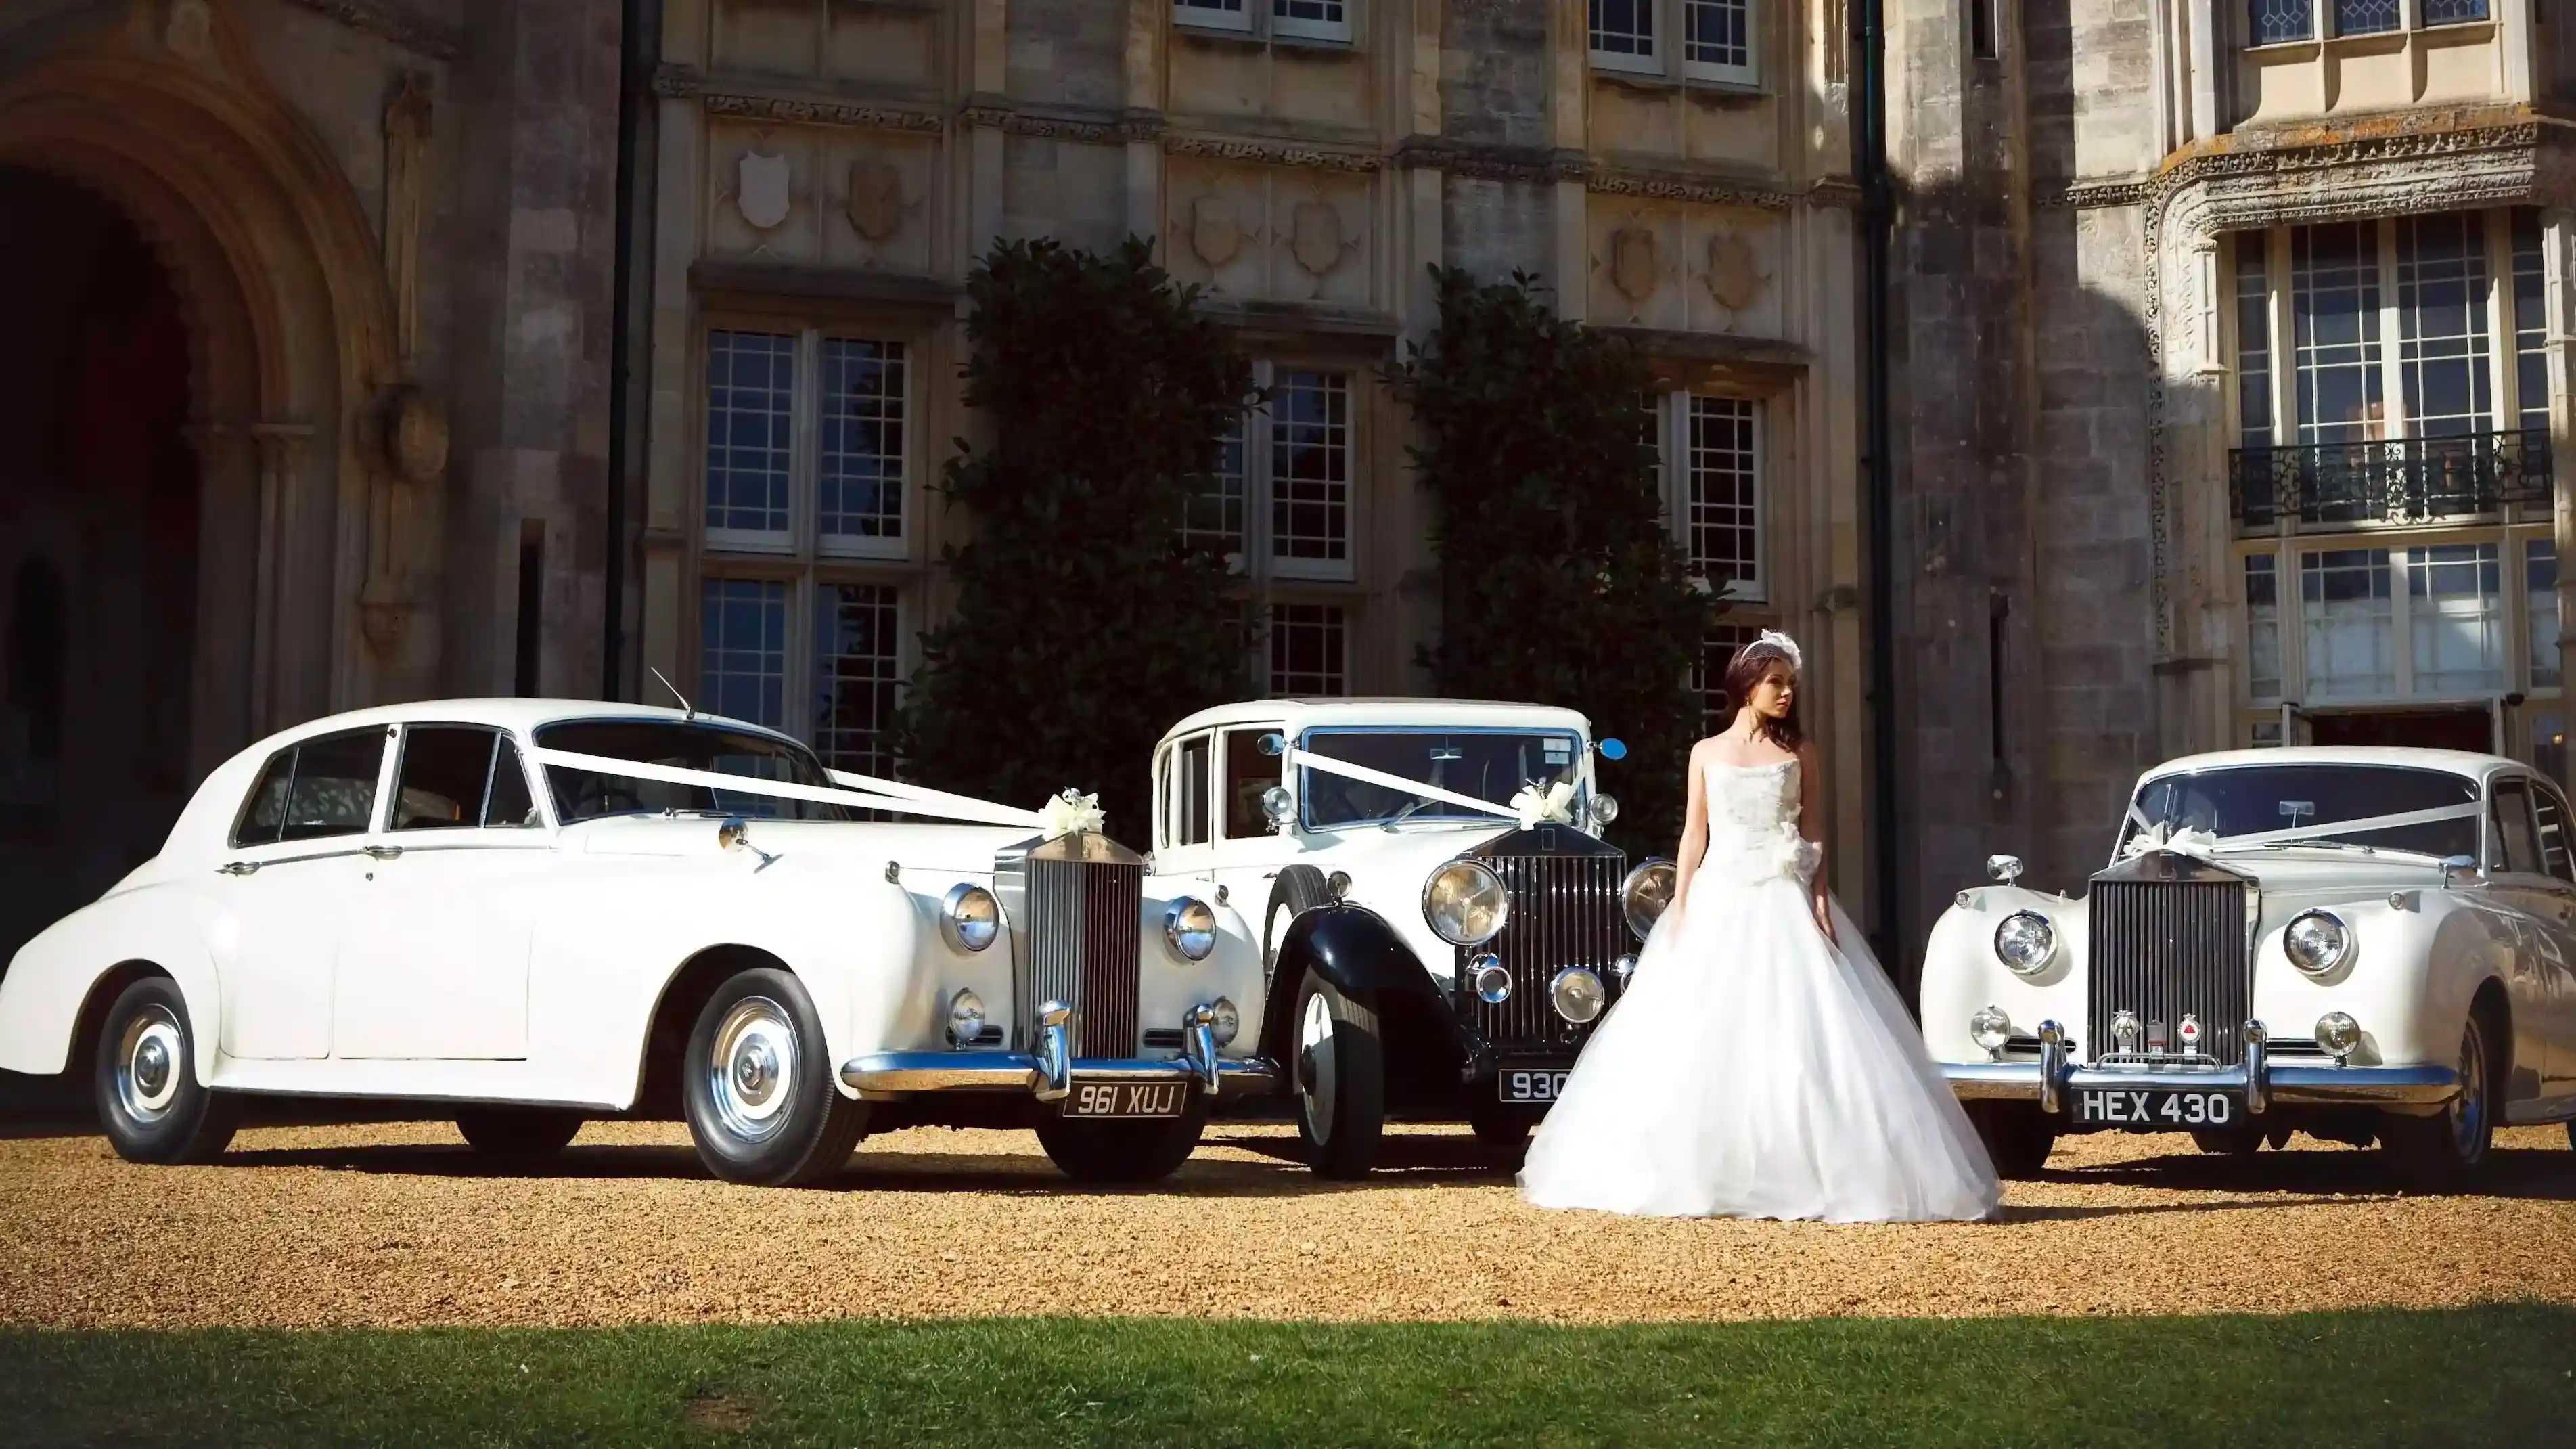 Selection of three classic and Vintage Rolls-Royce in White with Bride wearing a white wedding dress standing in the middle of the vehicles. Background is a popular wedding venue in the style of a castle in Leicestershire.